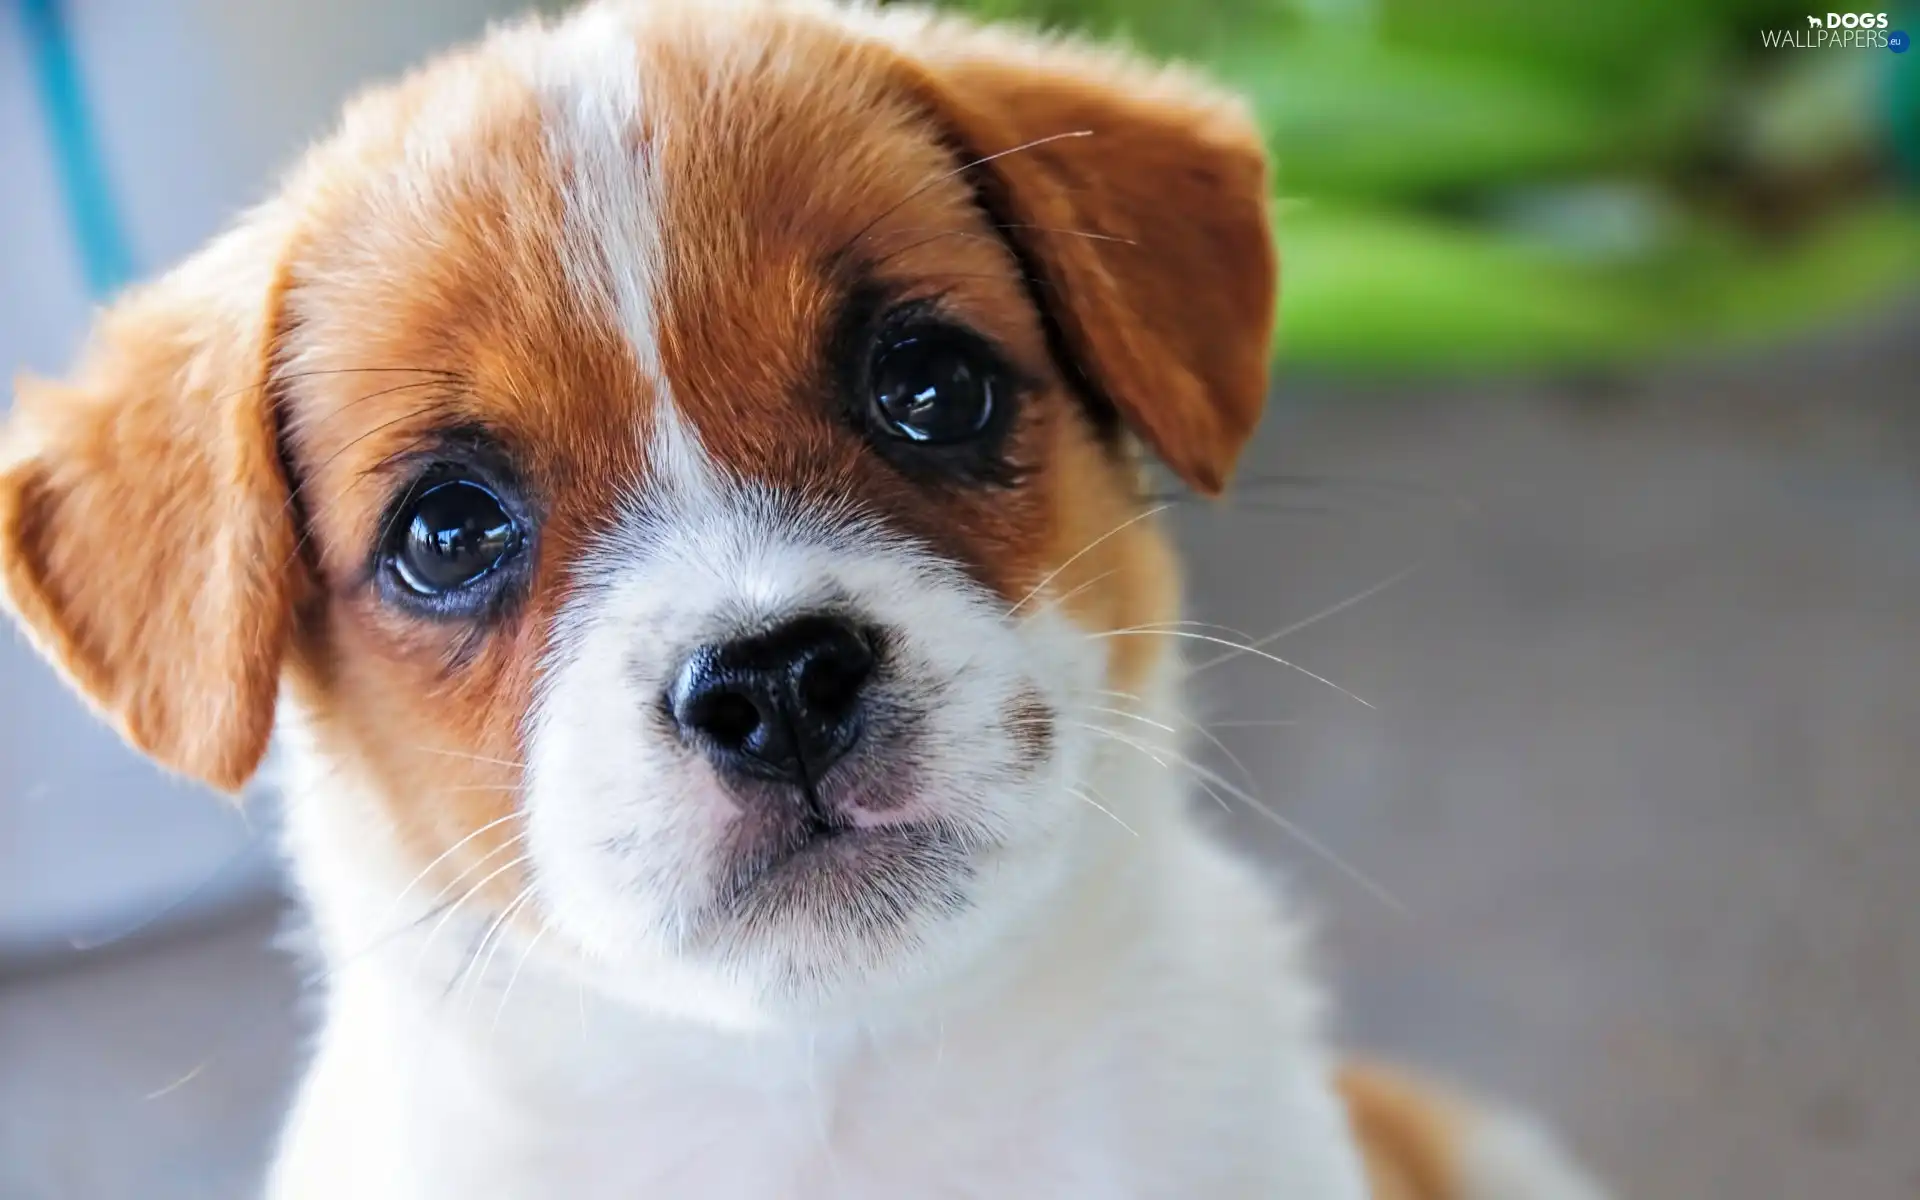 Puppy, Jack Russell Terrier, dog